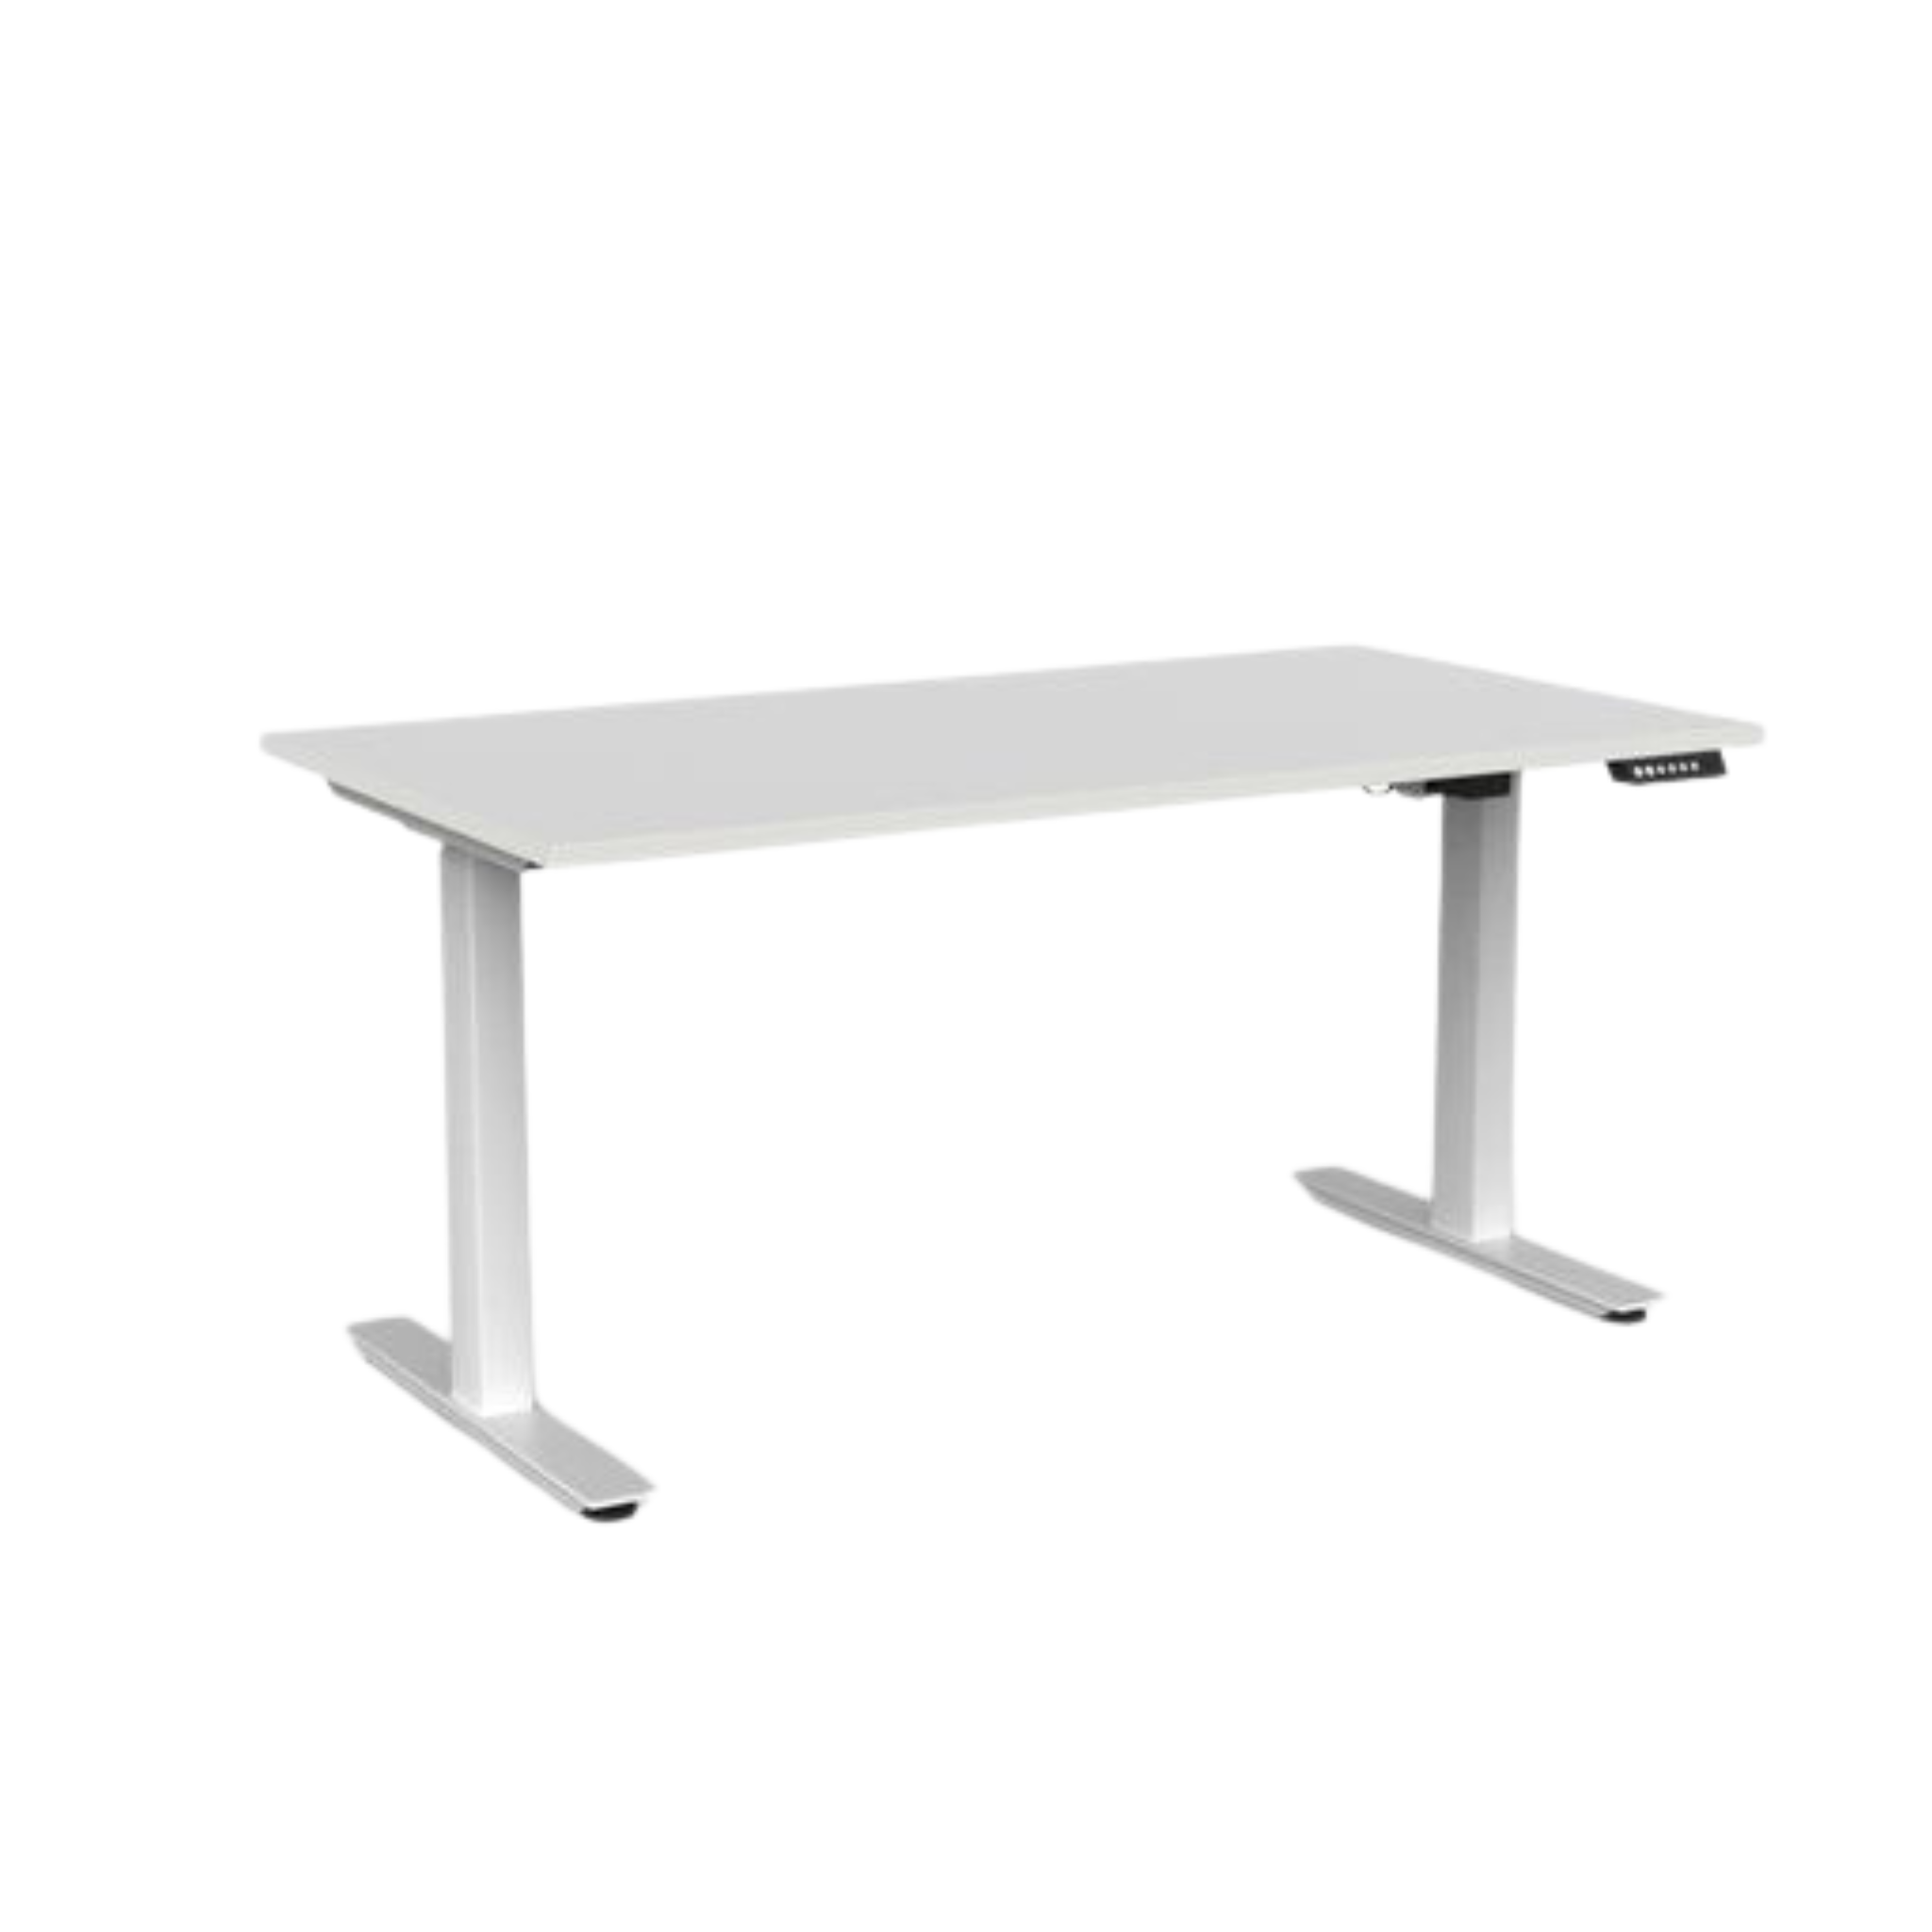 Agile 2 electric sit to stand desk with white frame and white top